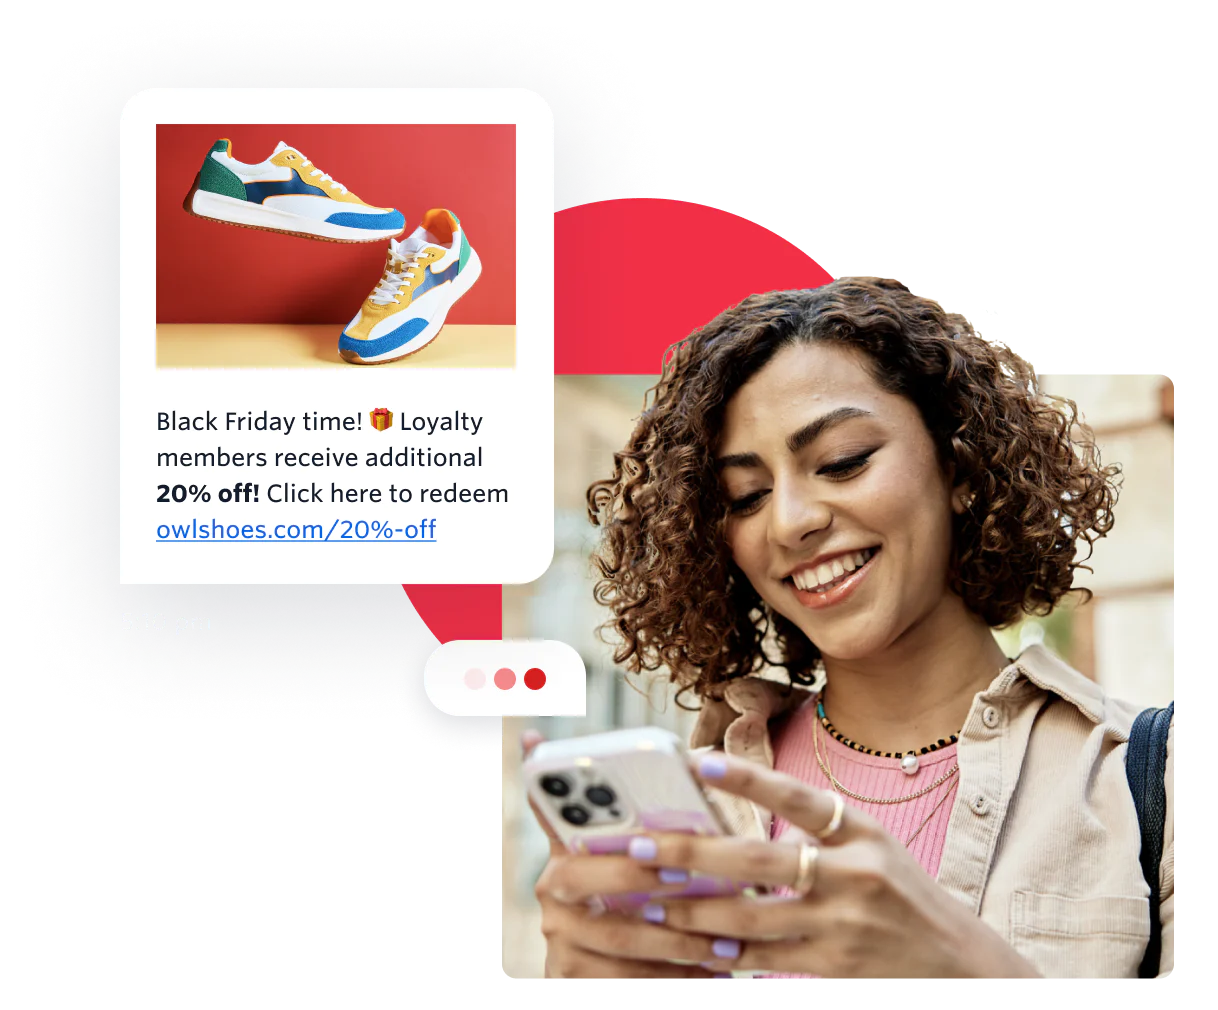 Customer engaging with SMS marketing